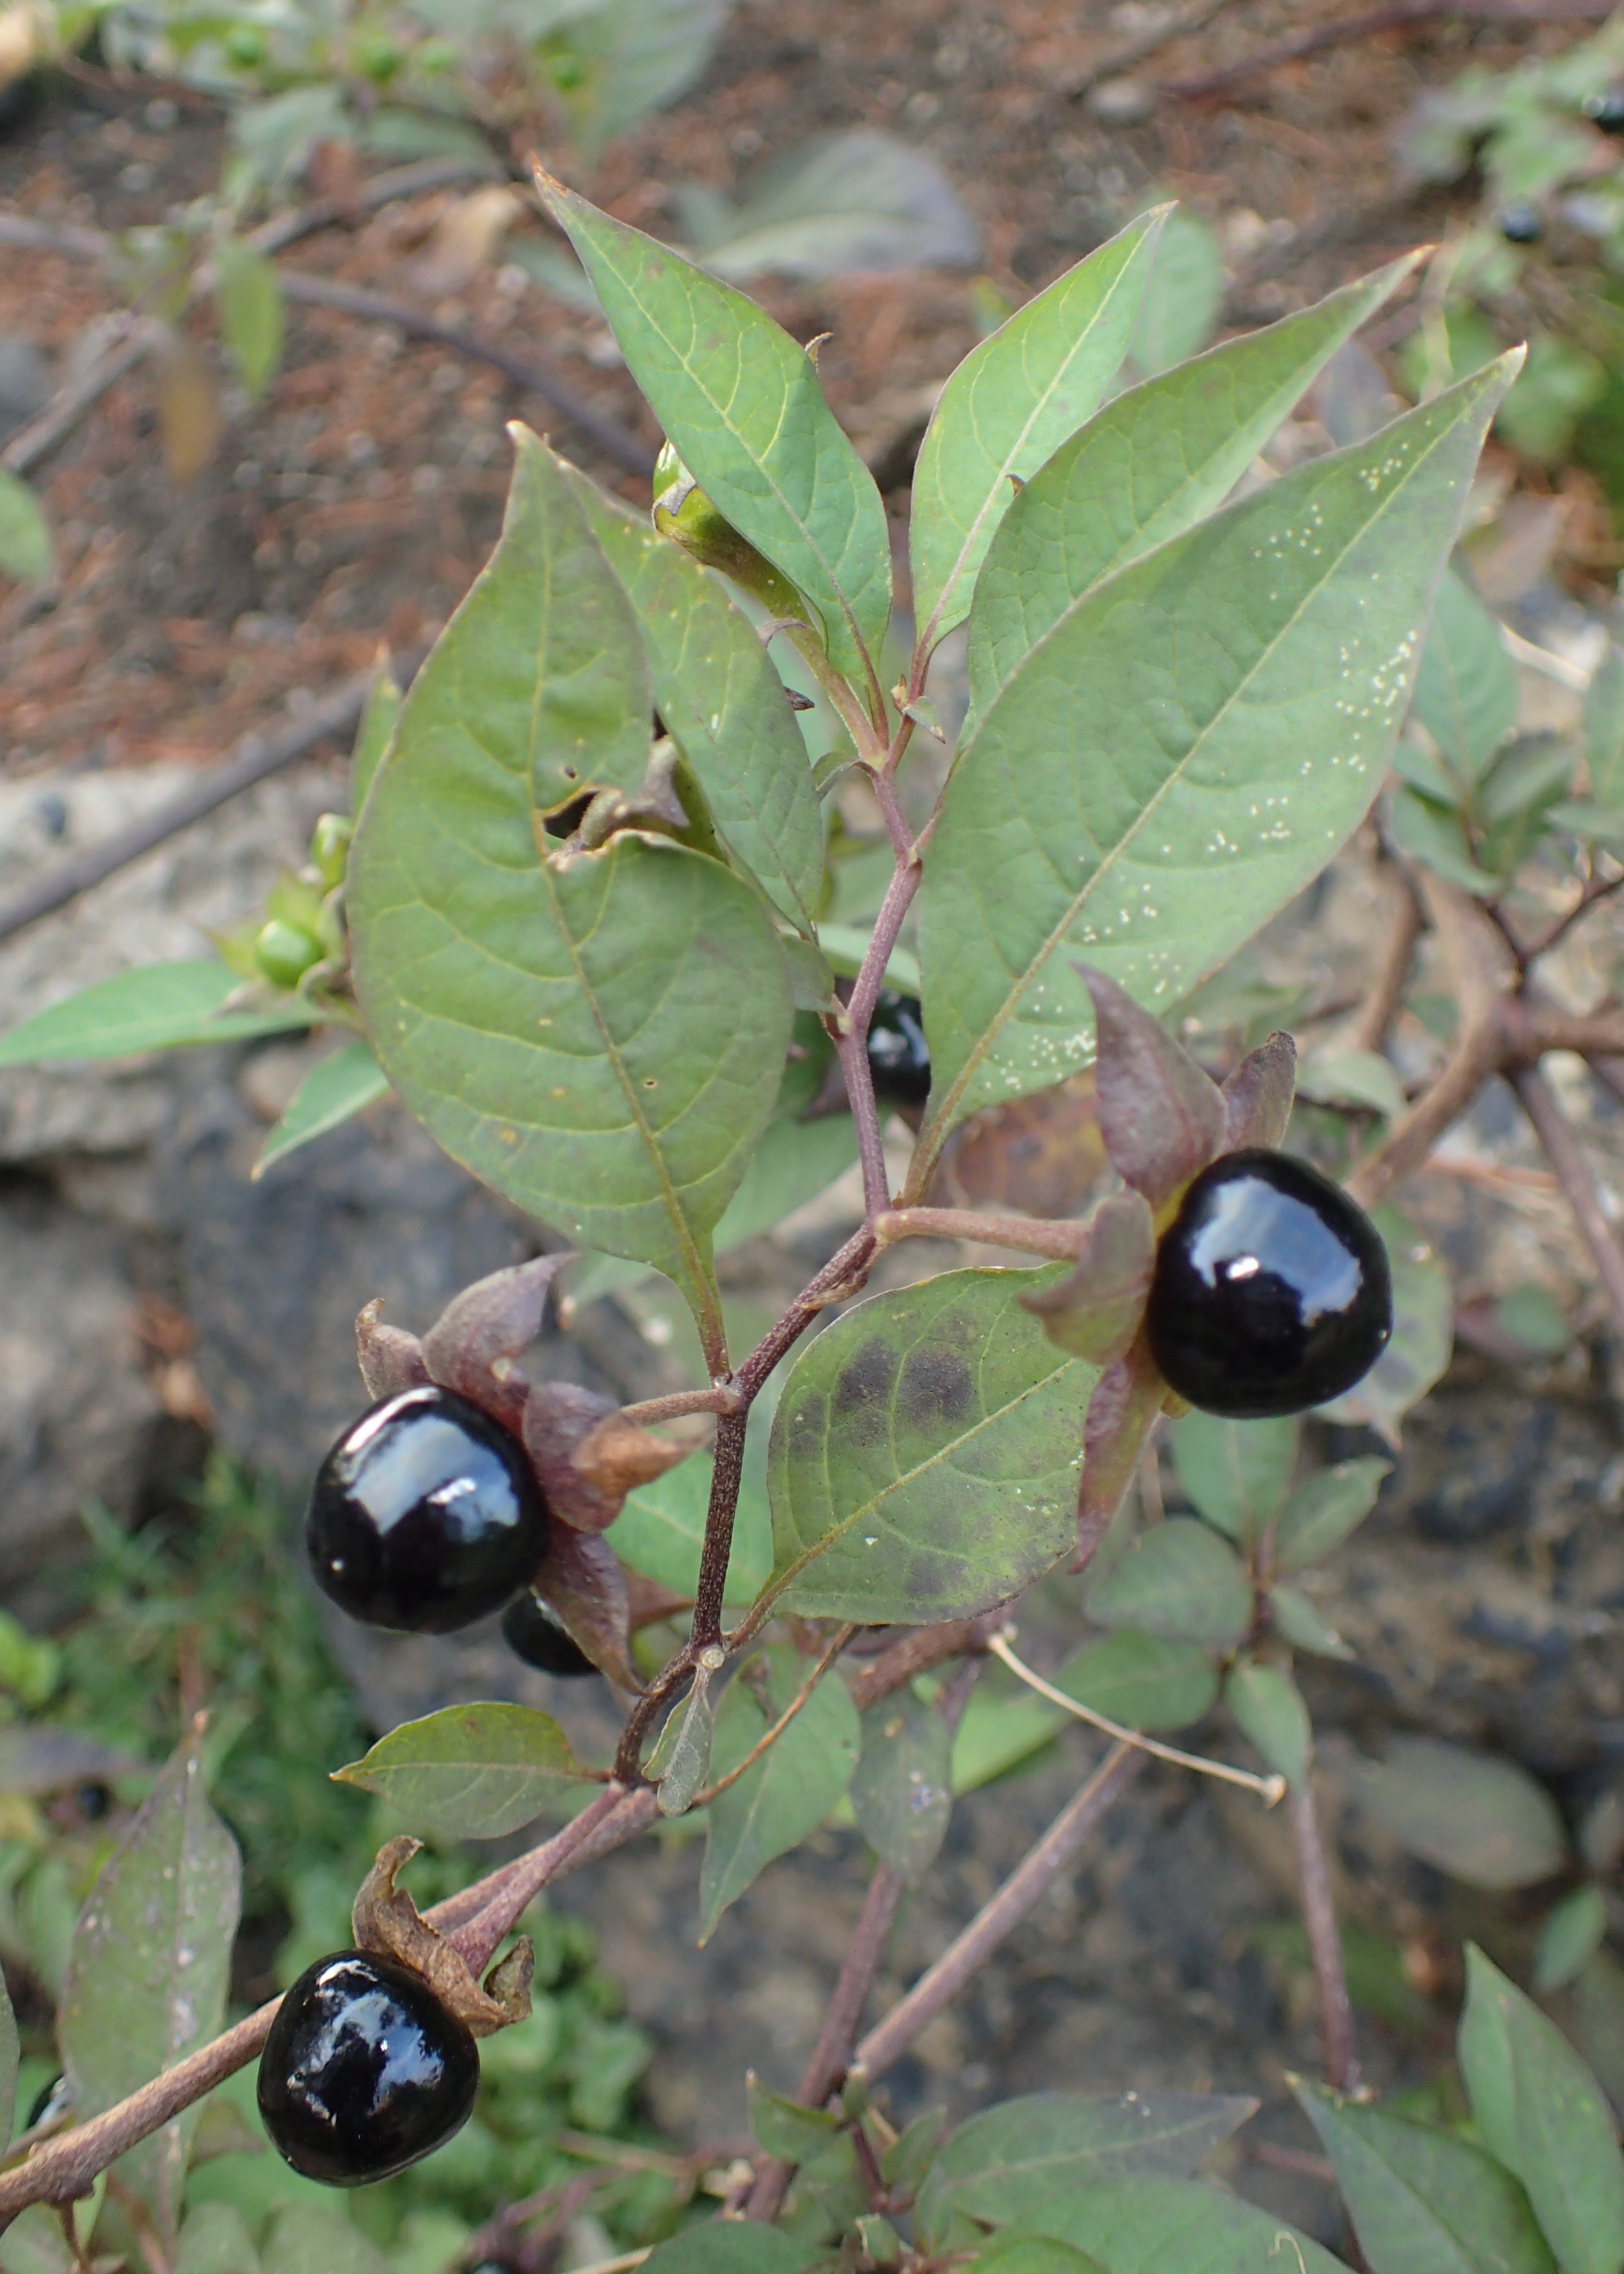 The deadly berries of belladonna often look appealing to children and to the unwary adult, and are sometimes mistaken for blueberries and other edible fruits. Image source: Krzysztof Ziarnek, Kenraiz, CC BY-SA 4.0, via Wikimedia Commons